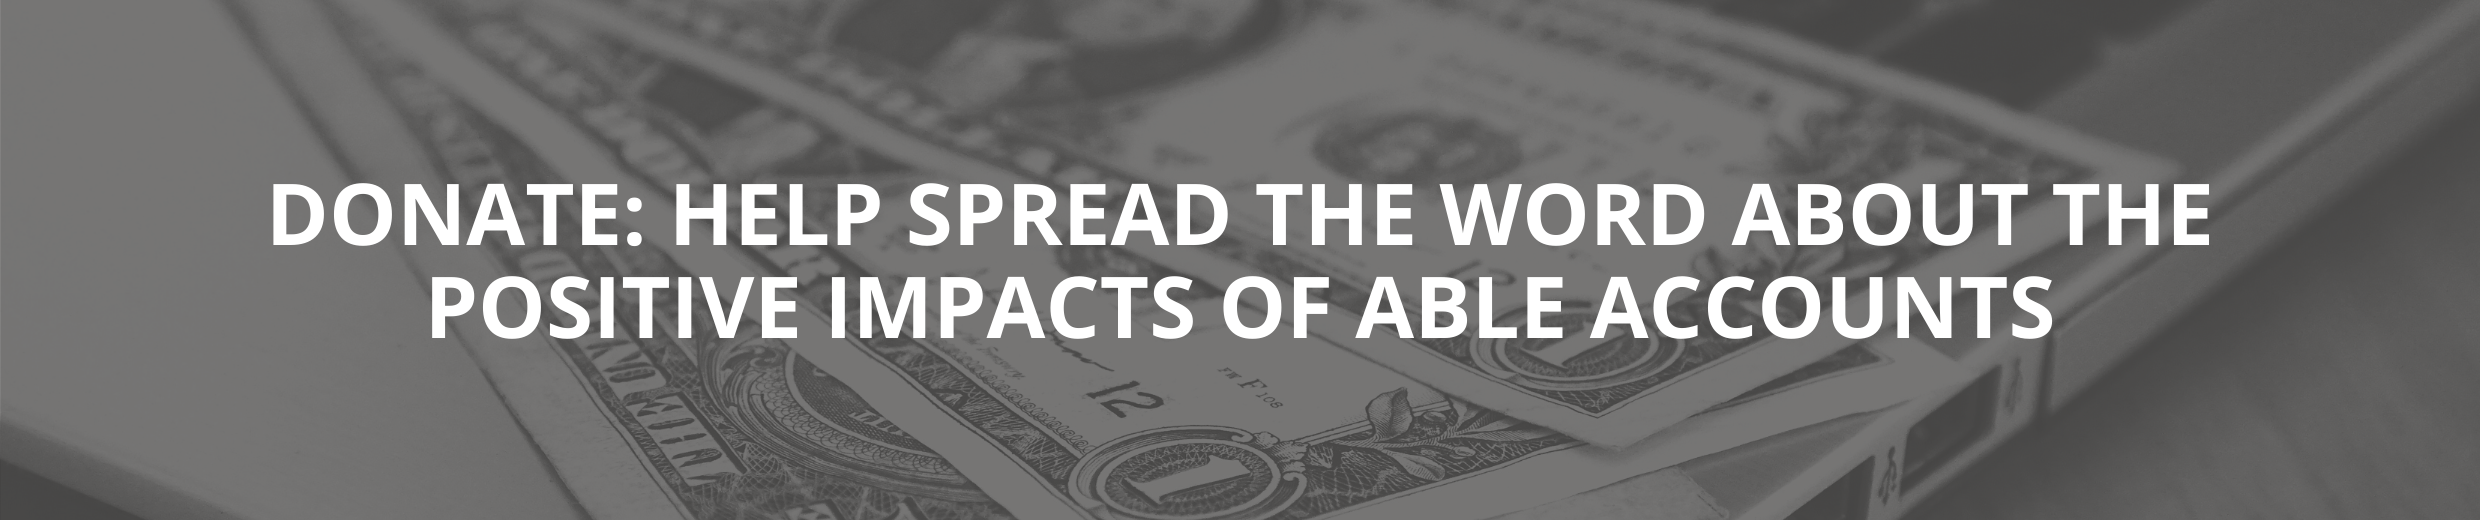 Donate: Help spread the word about the positive impacts of ABLE accounts.